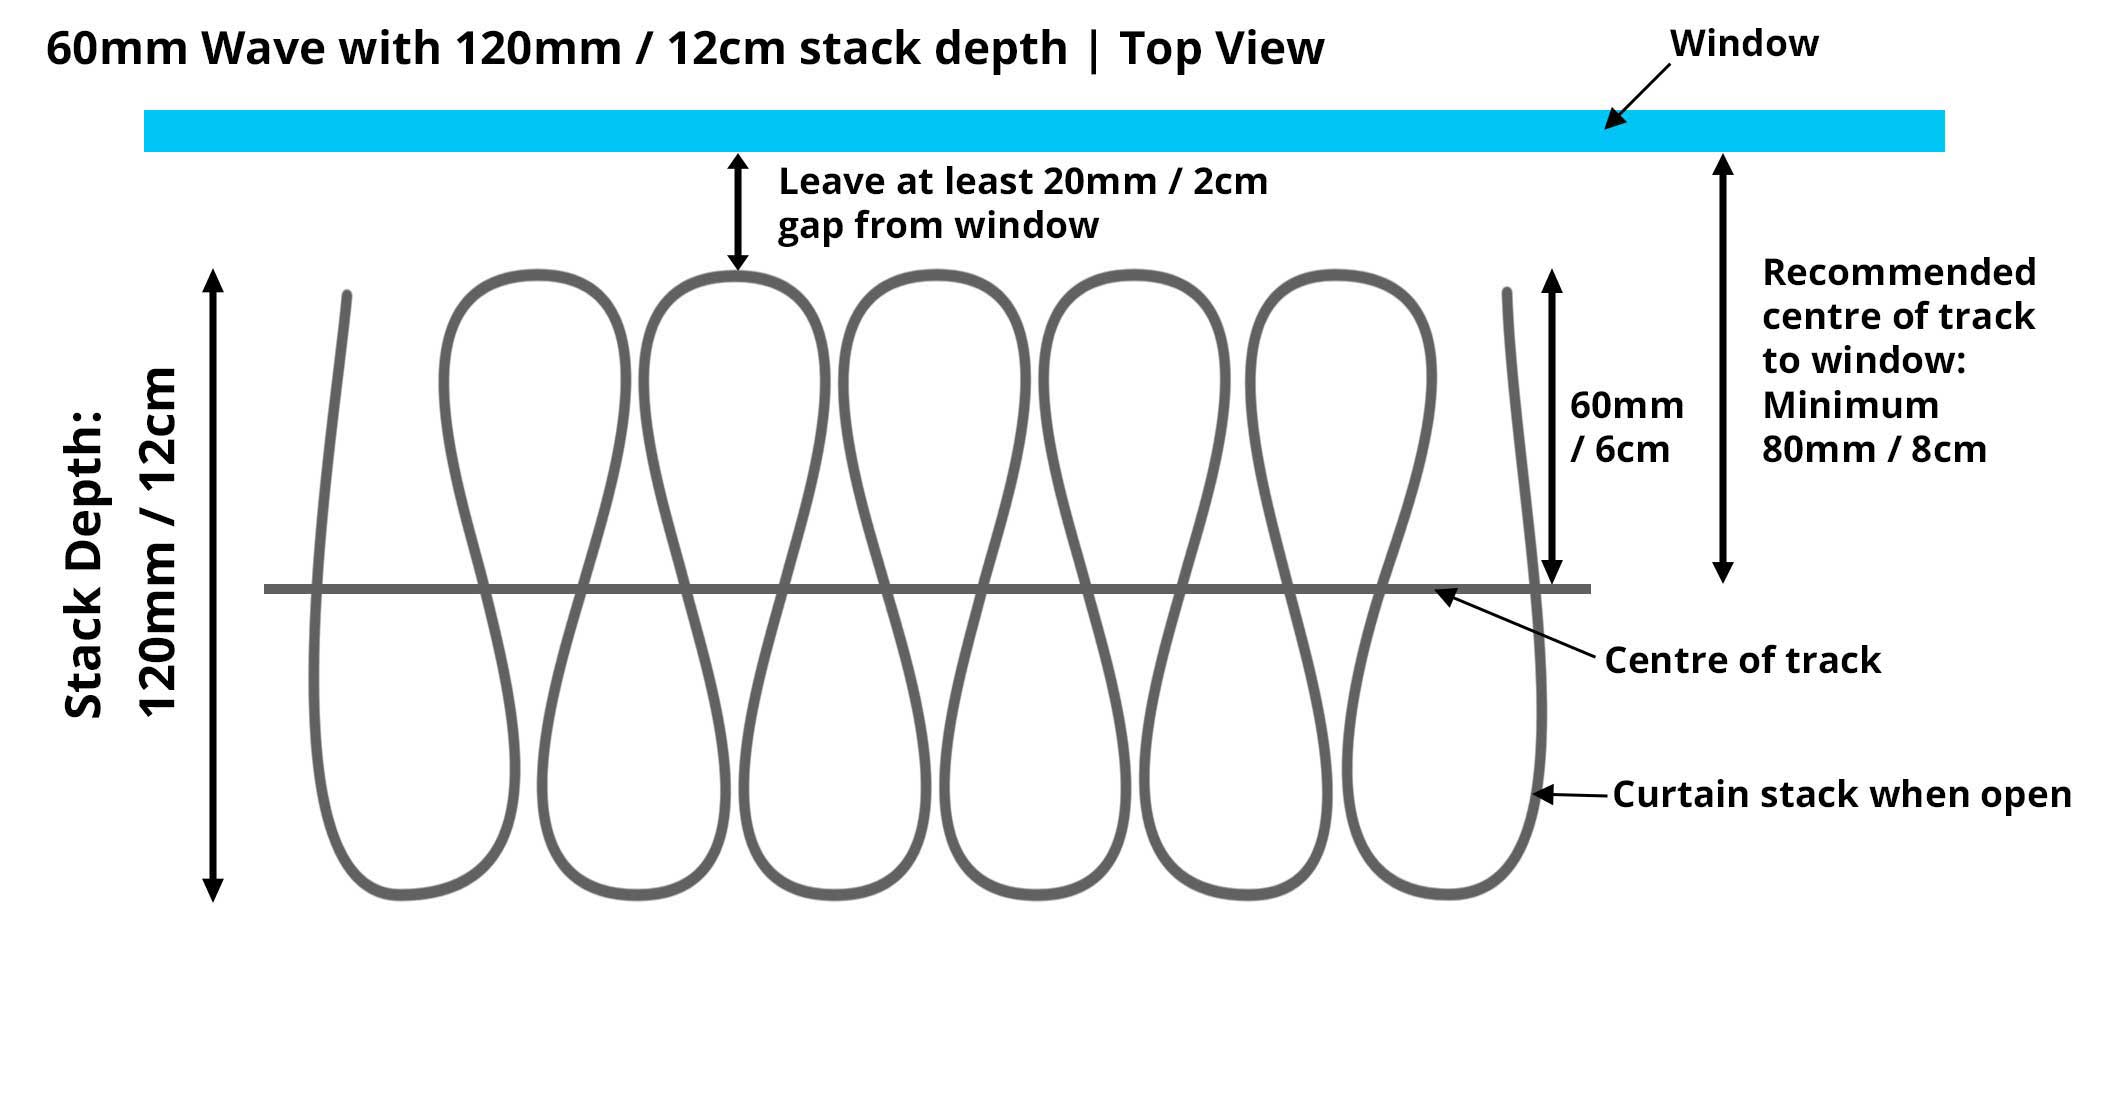 An image explaining the 120mm stack depth on a 60mm Wave curtain